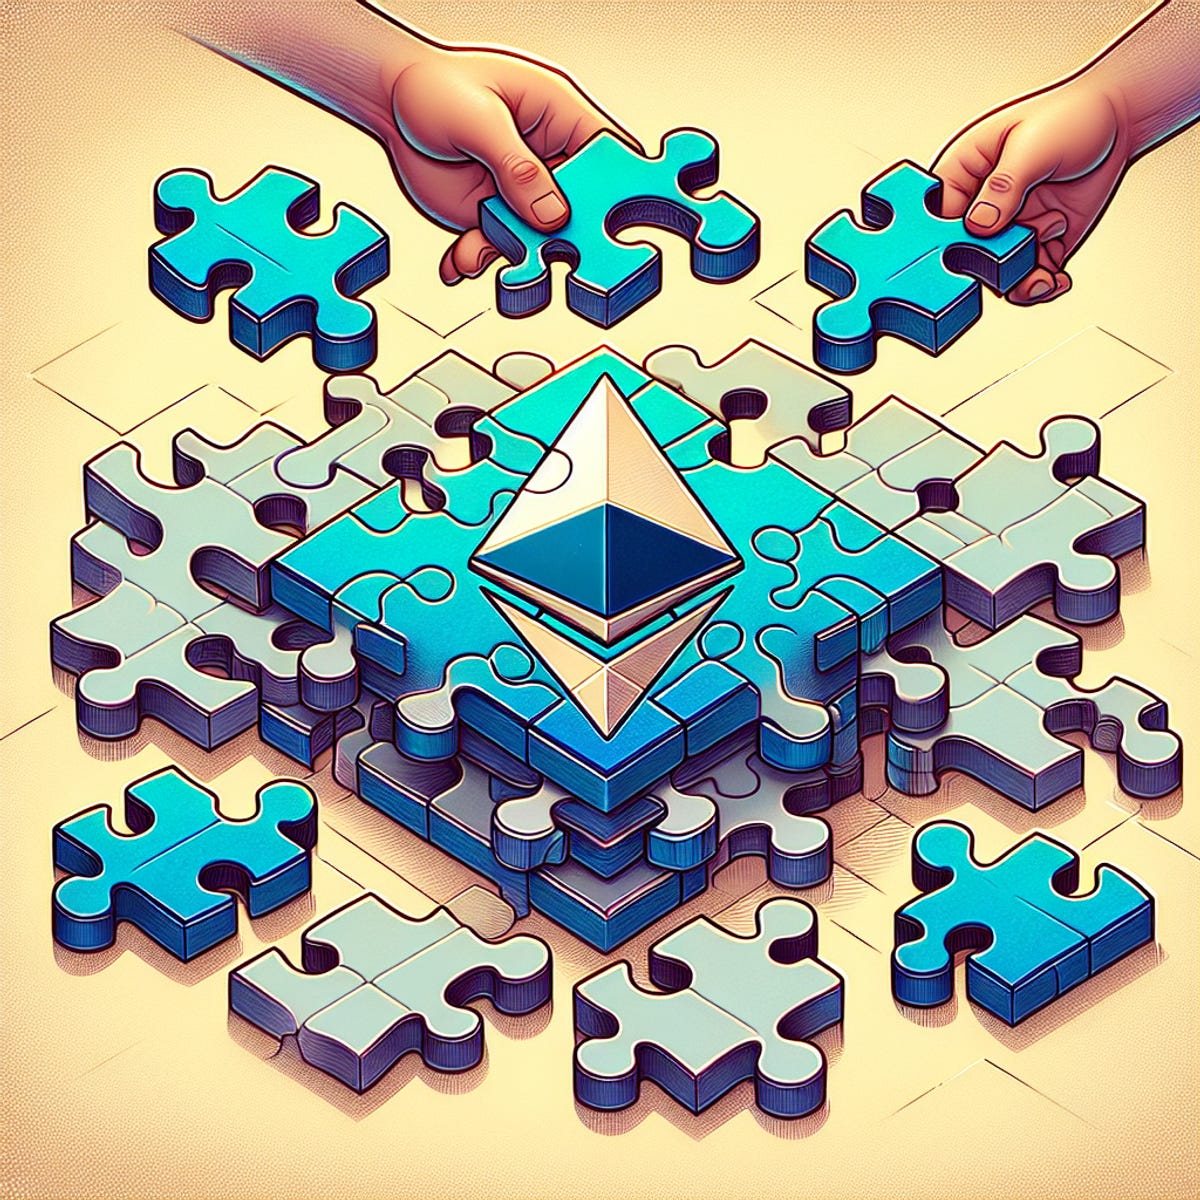 A jigsaw puzzle piece with the Ethereum symbol seamlessly fitting into a larger, incomplete puzzle, representing problem-solving and progression in Ethereum's Proof of Stake consensus protocol.